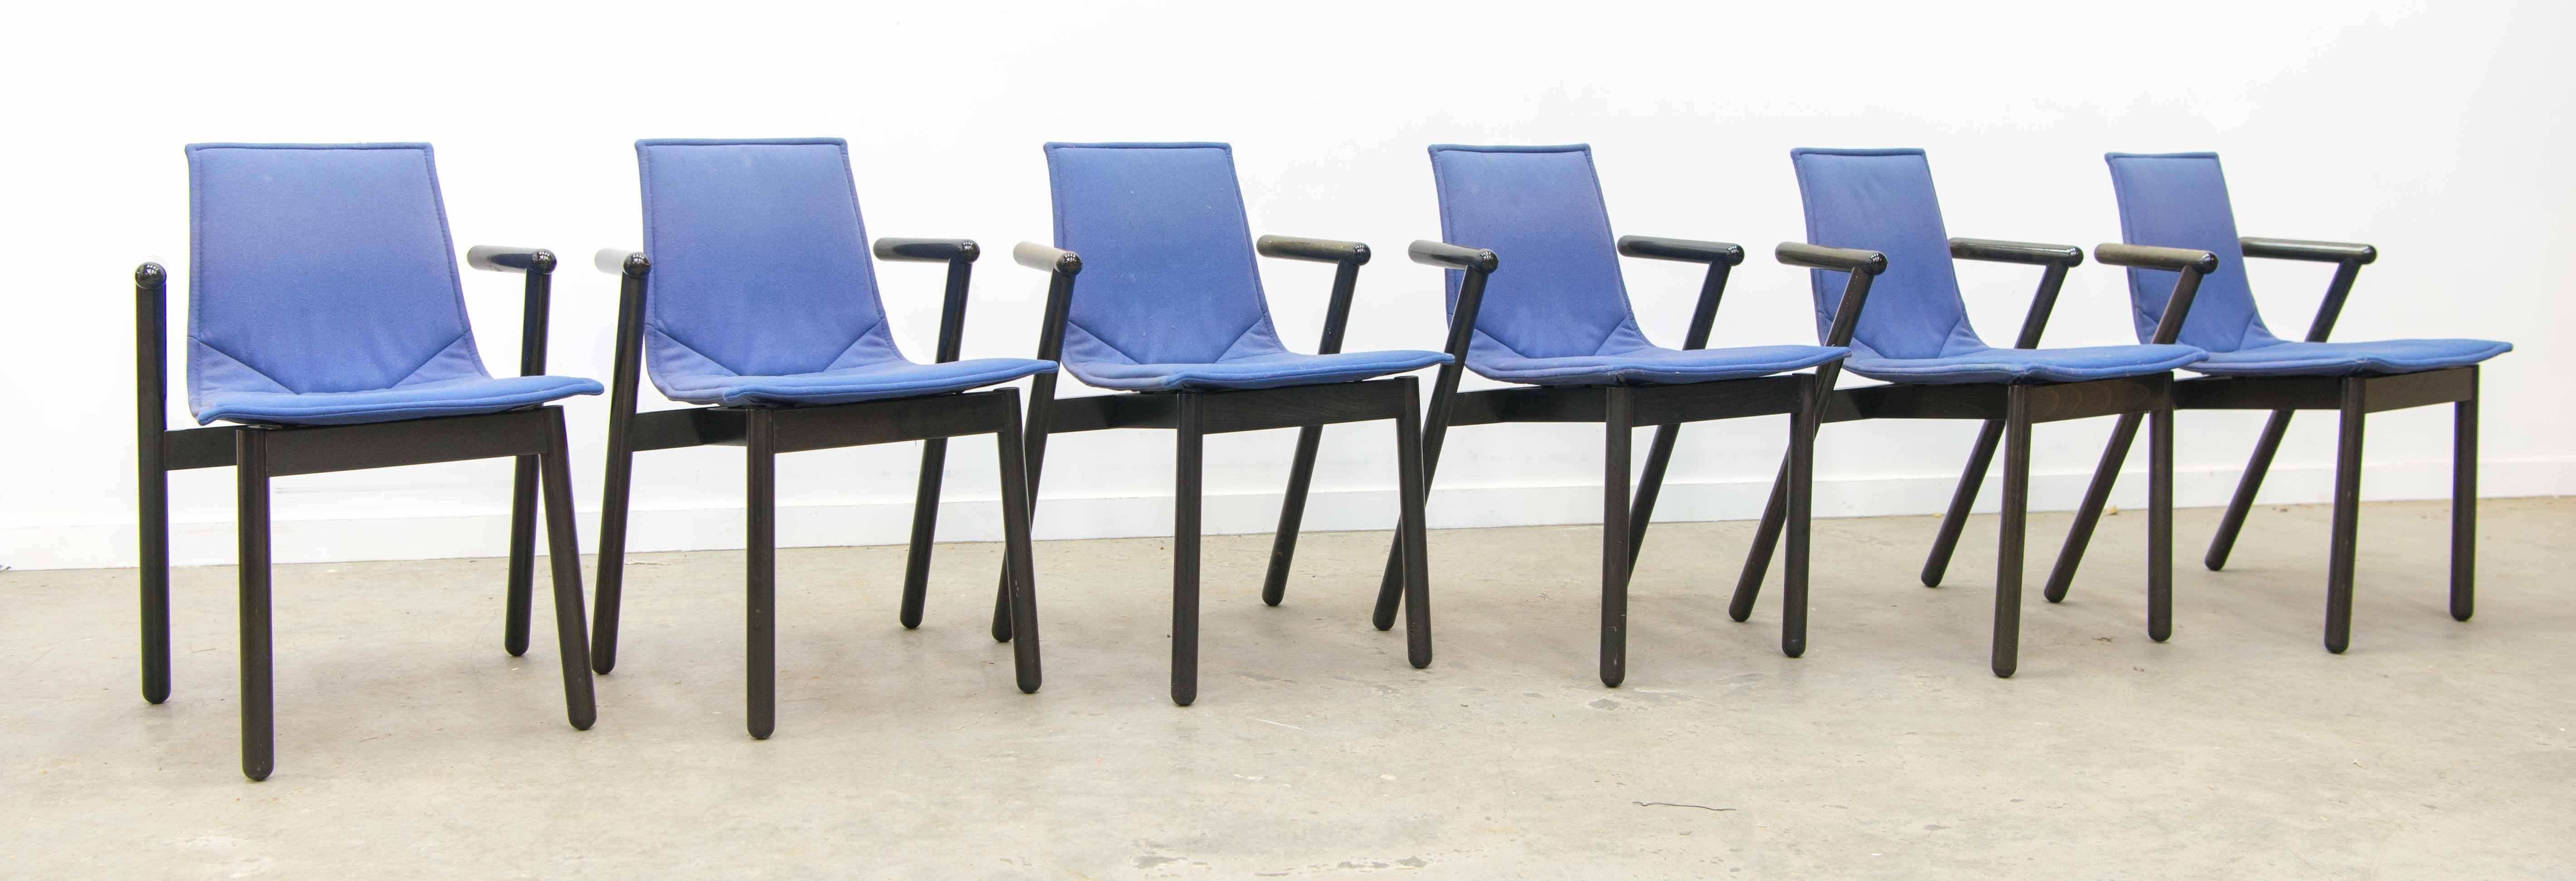 We have for sale this nice set of Cassina chairs, designed by Vico Magistretti. They are very well made and have a solid feeling when holding. They are made of a wood structure with polyurethane and fabric finish. The color is mainly a deep blue.